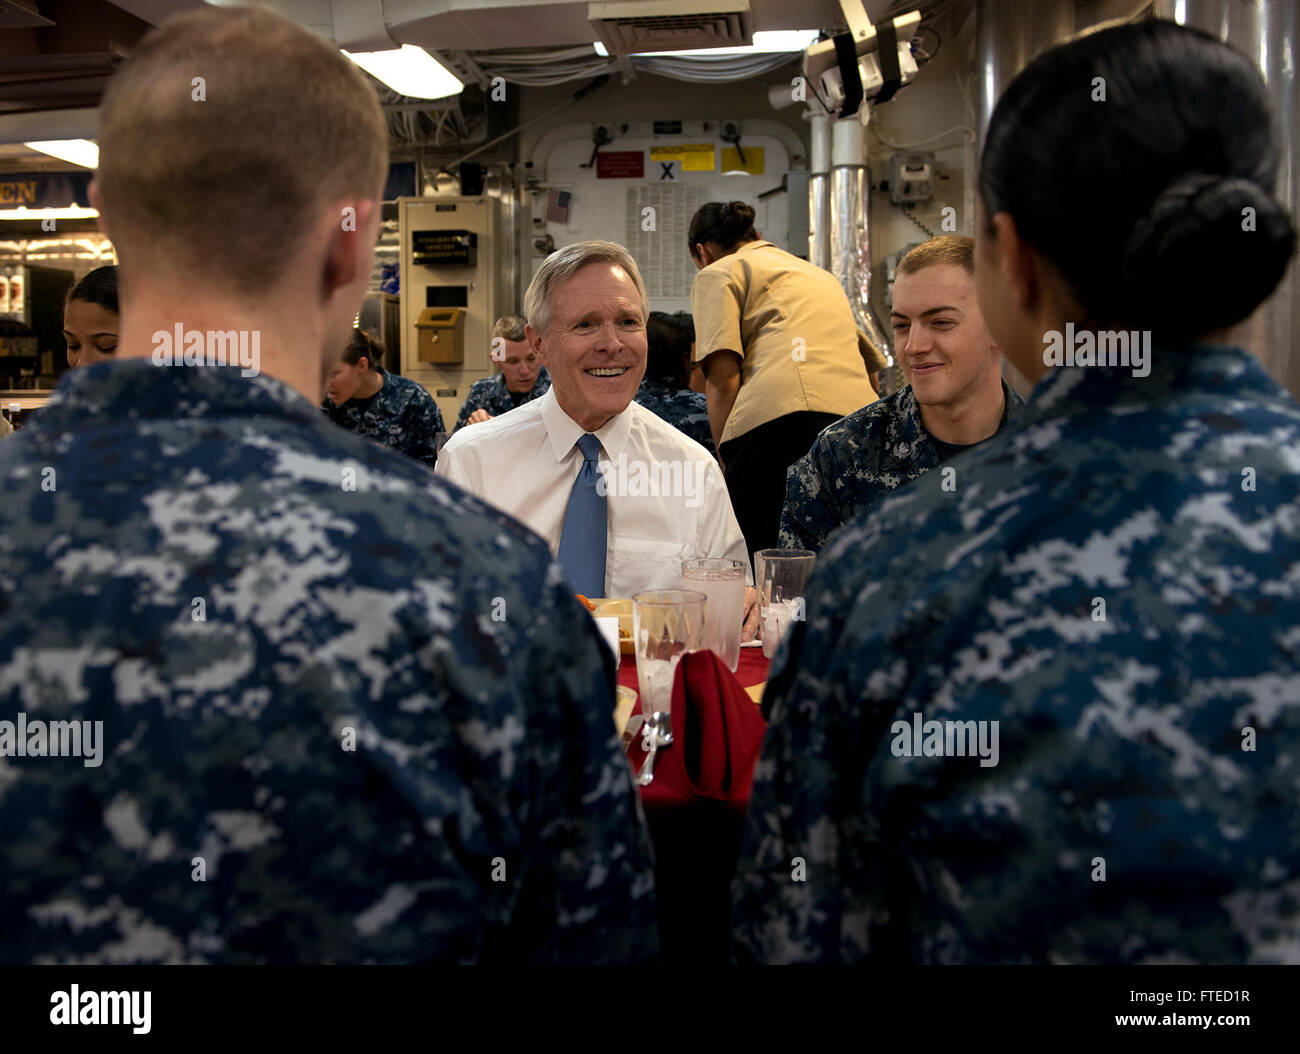 MEDITERRANEAN SEA (April 1, 2014) - Secretary of the Navy Ray Mabus converses with Sailors during his lunch with members of the crew on board the guided-missile destroyer USS Bulkeley (DDG 84). Bulkeley, deployed as part of Harry S. Truman Carrier Strike Group, is operating in the U.S. 6th Fleet area of operations in support of maritime security operations and theater security cooperation efforts as it completes a 9-month deployment to the U.S. 5th and 6th Fleet areas of operations. Stock Photo